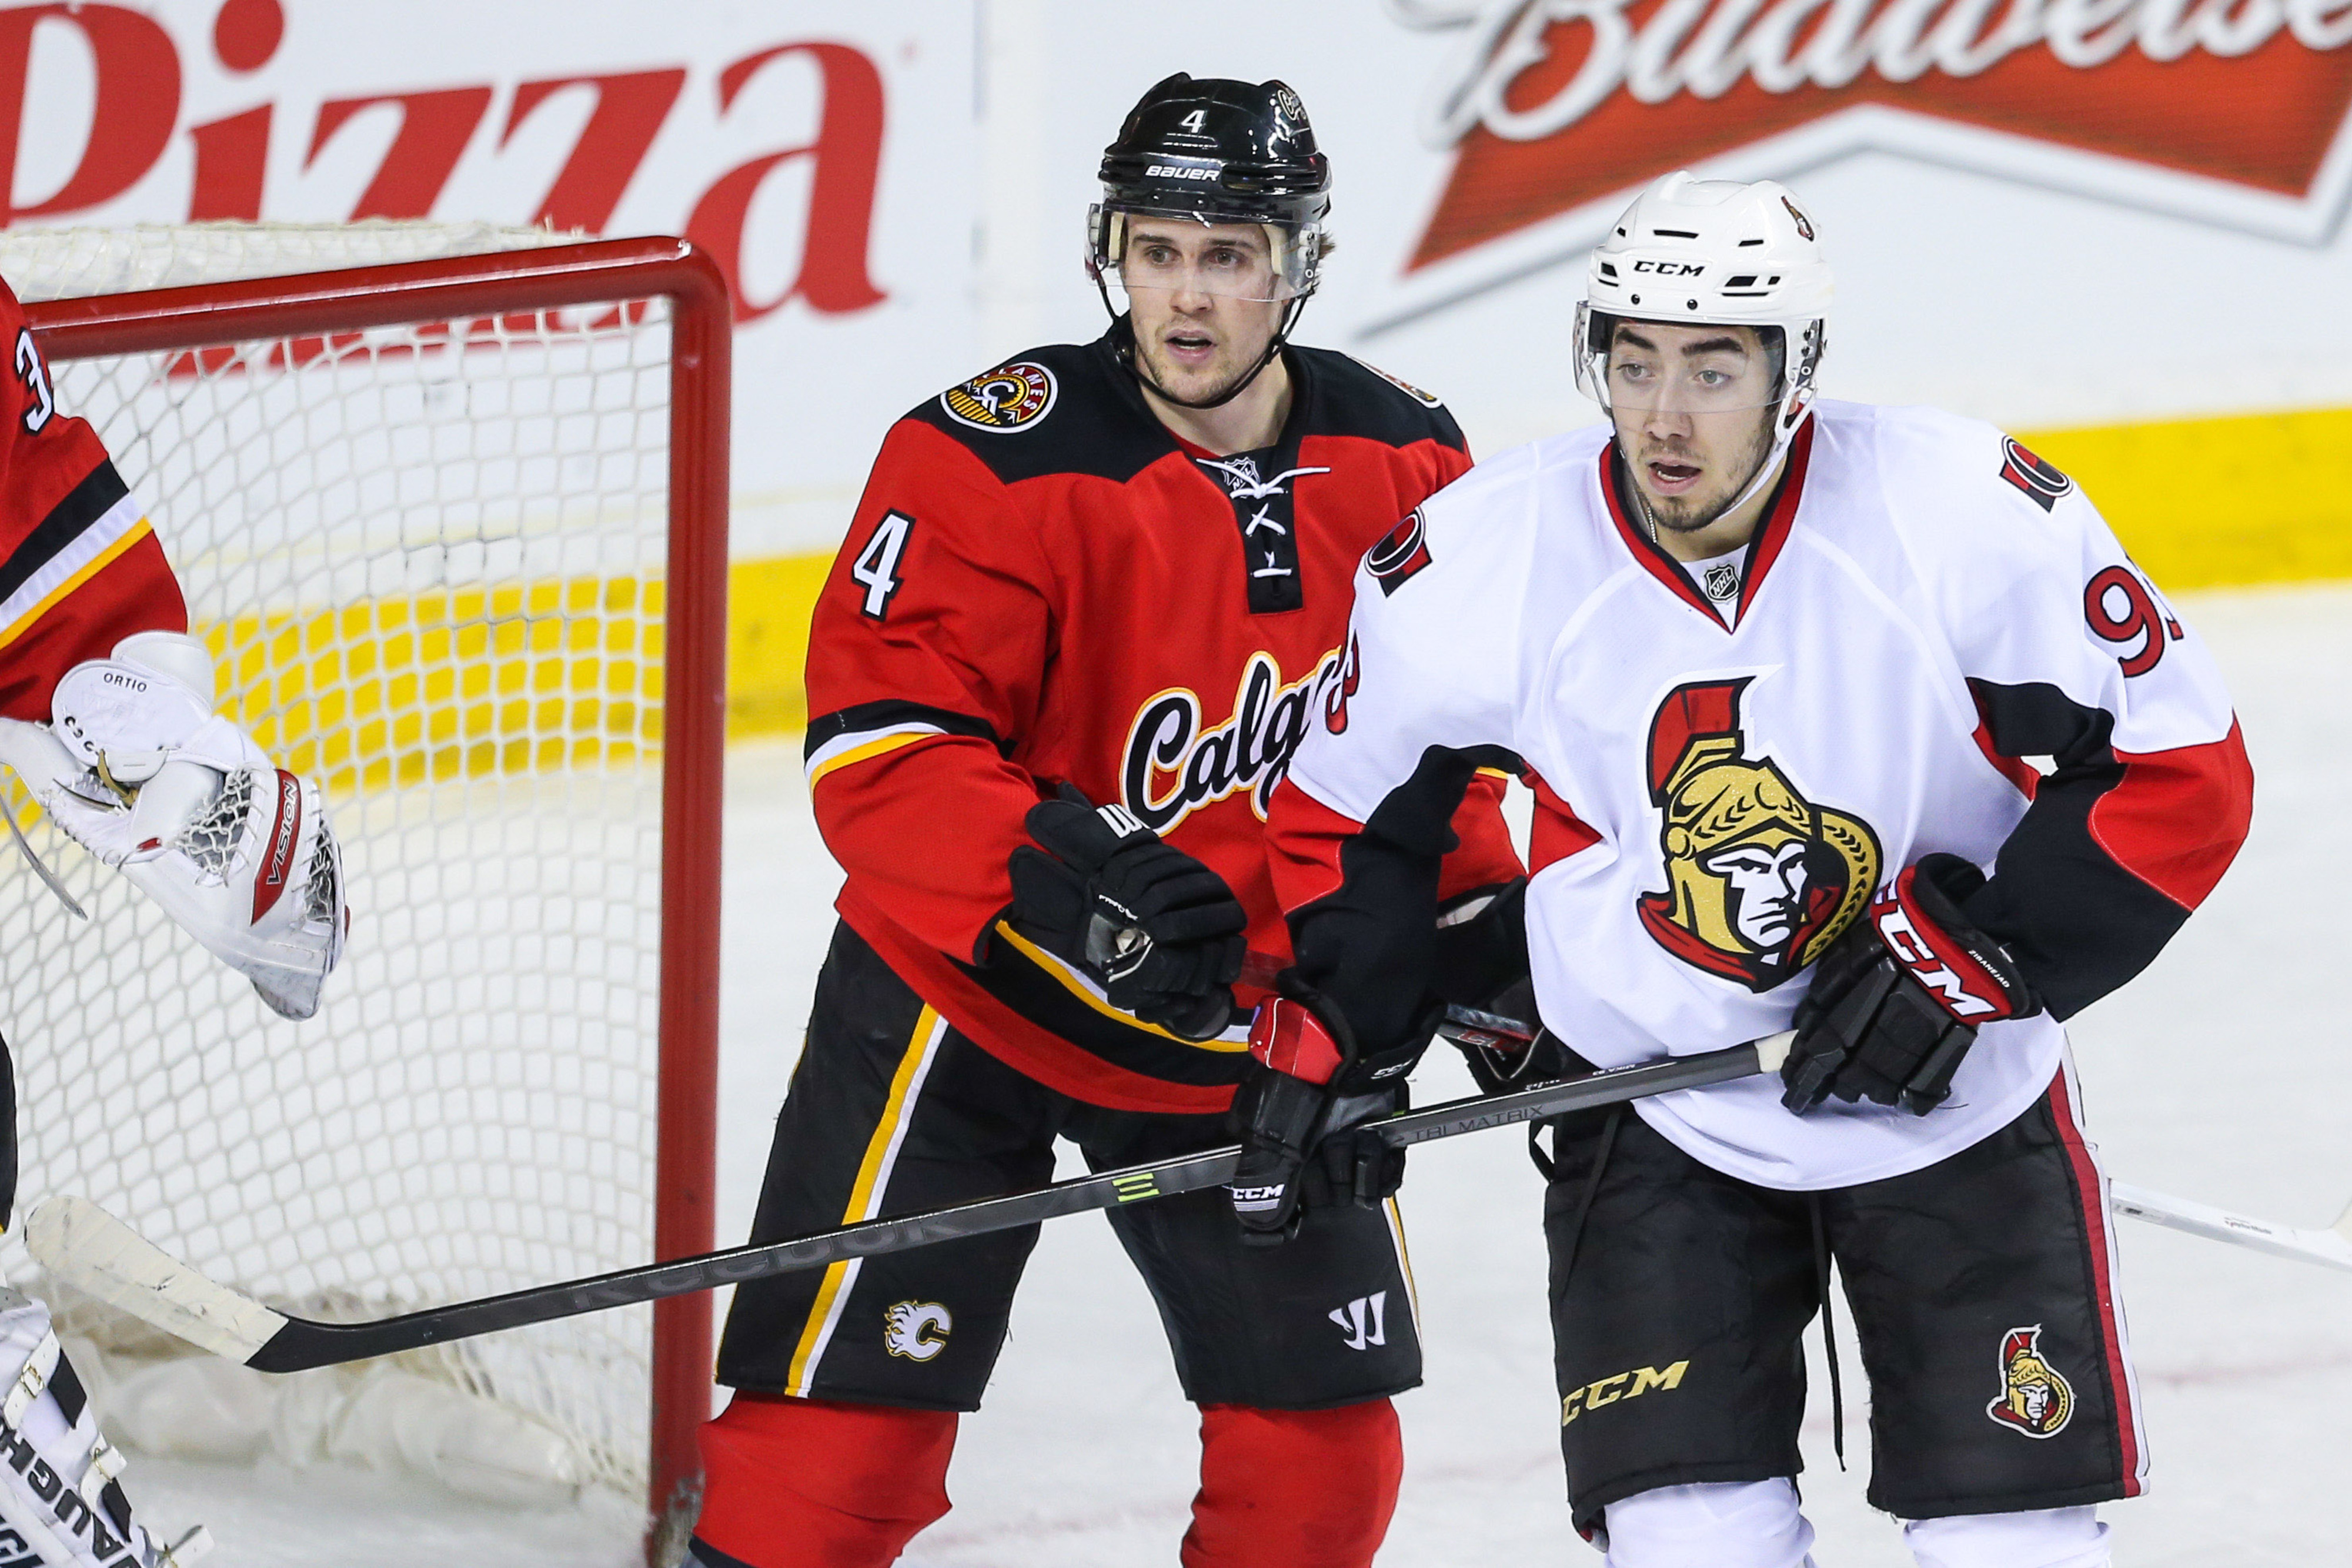 Zibanejad looks alarmed by something that's going on in the corner